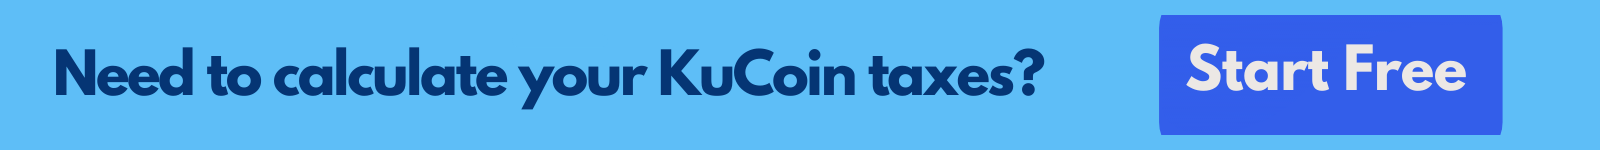 Calculate your KuCoin taxes free with Koinly